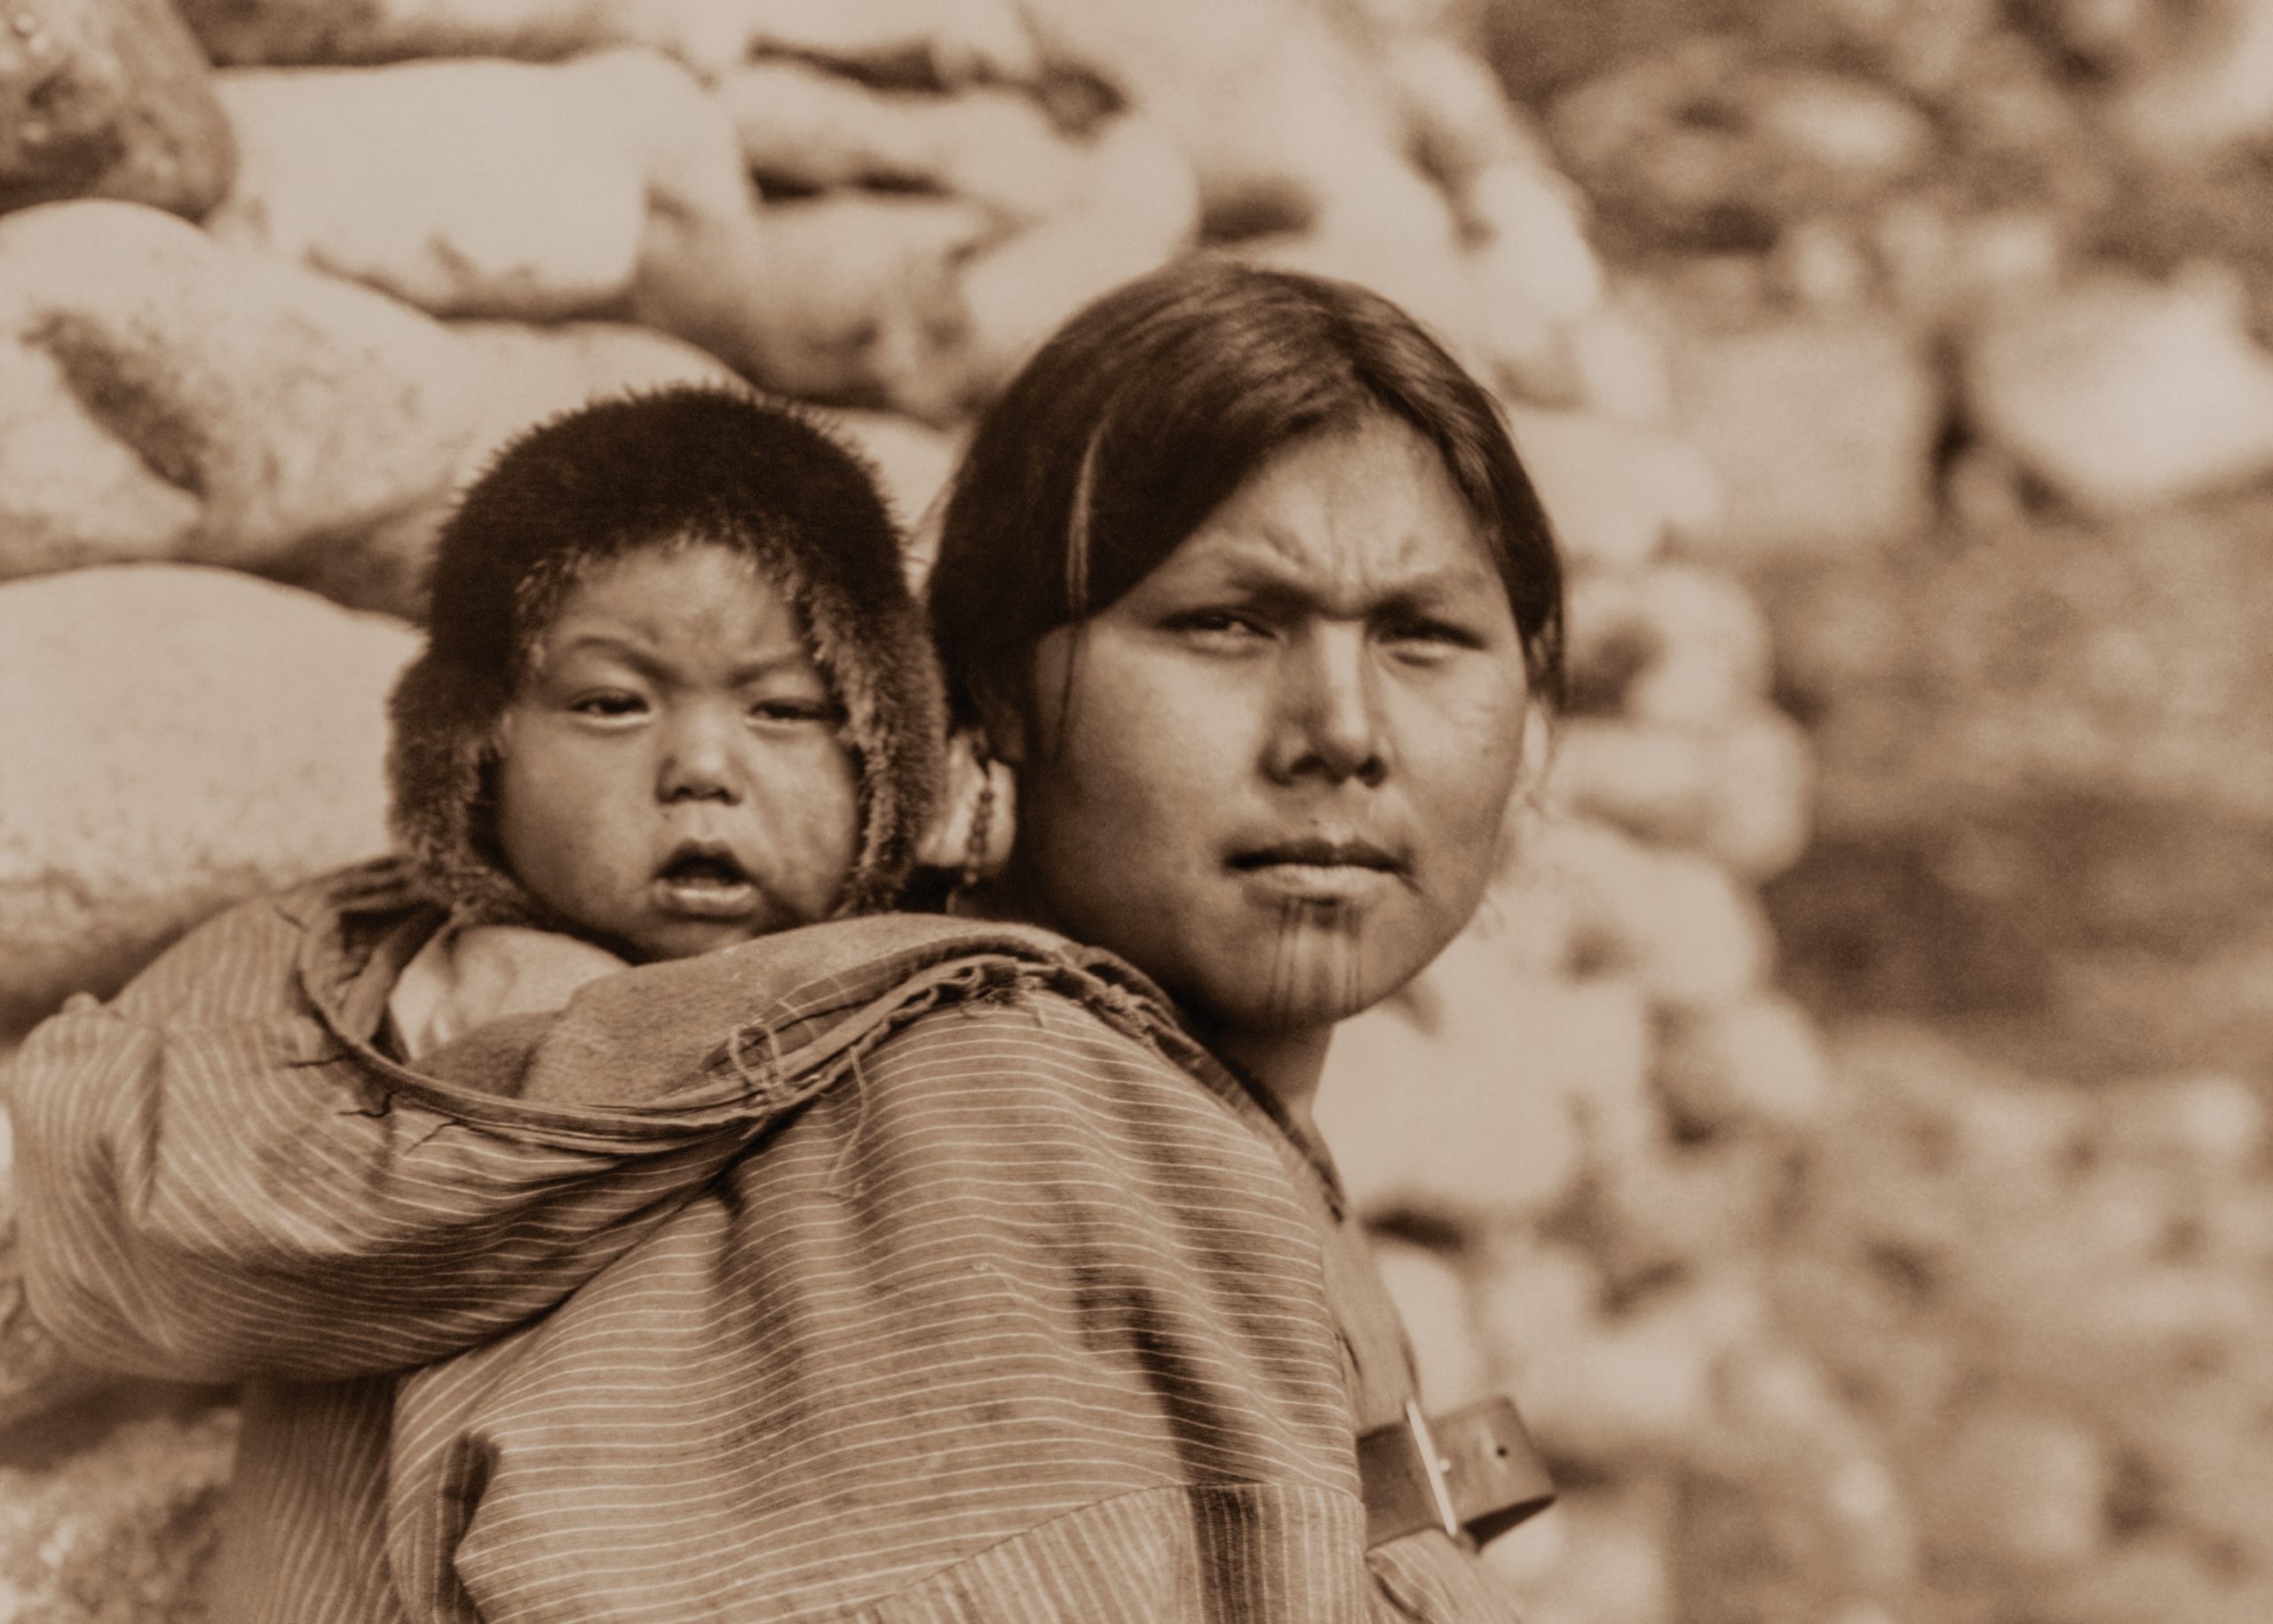 This photo of an Indigenous mother and child from the Diomede Islands is part of the new exhibition “Edward S. Curtis: Unpublished Alaska, the Lost Photographs,” running  September 16, 2021 through January 9, 2022, at The Muskegon Museum of Art in Muskegon, Michigan. (Photo/Courtesy of the Curtis Legacy Foundation)